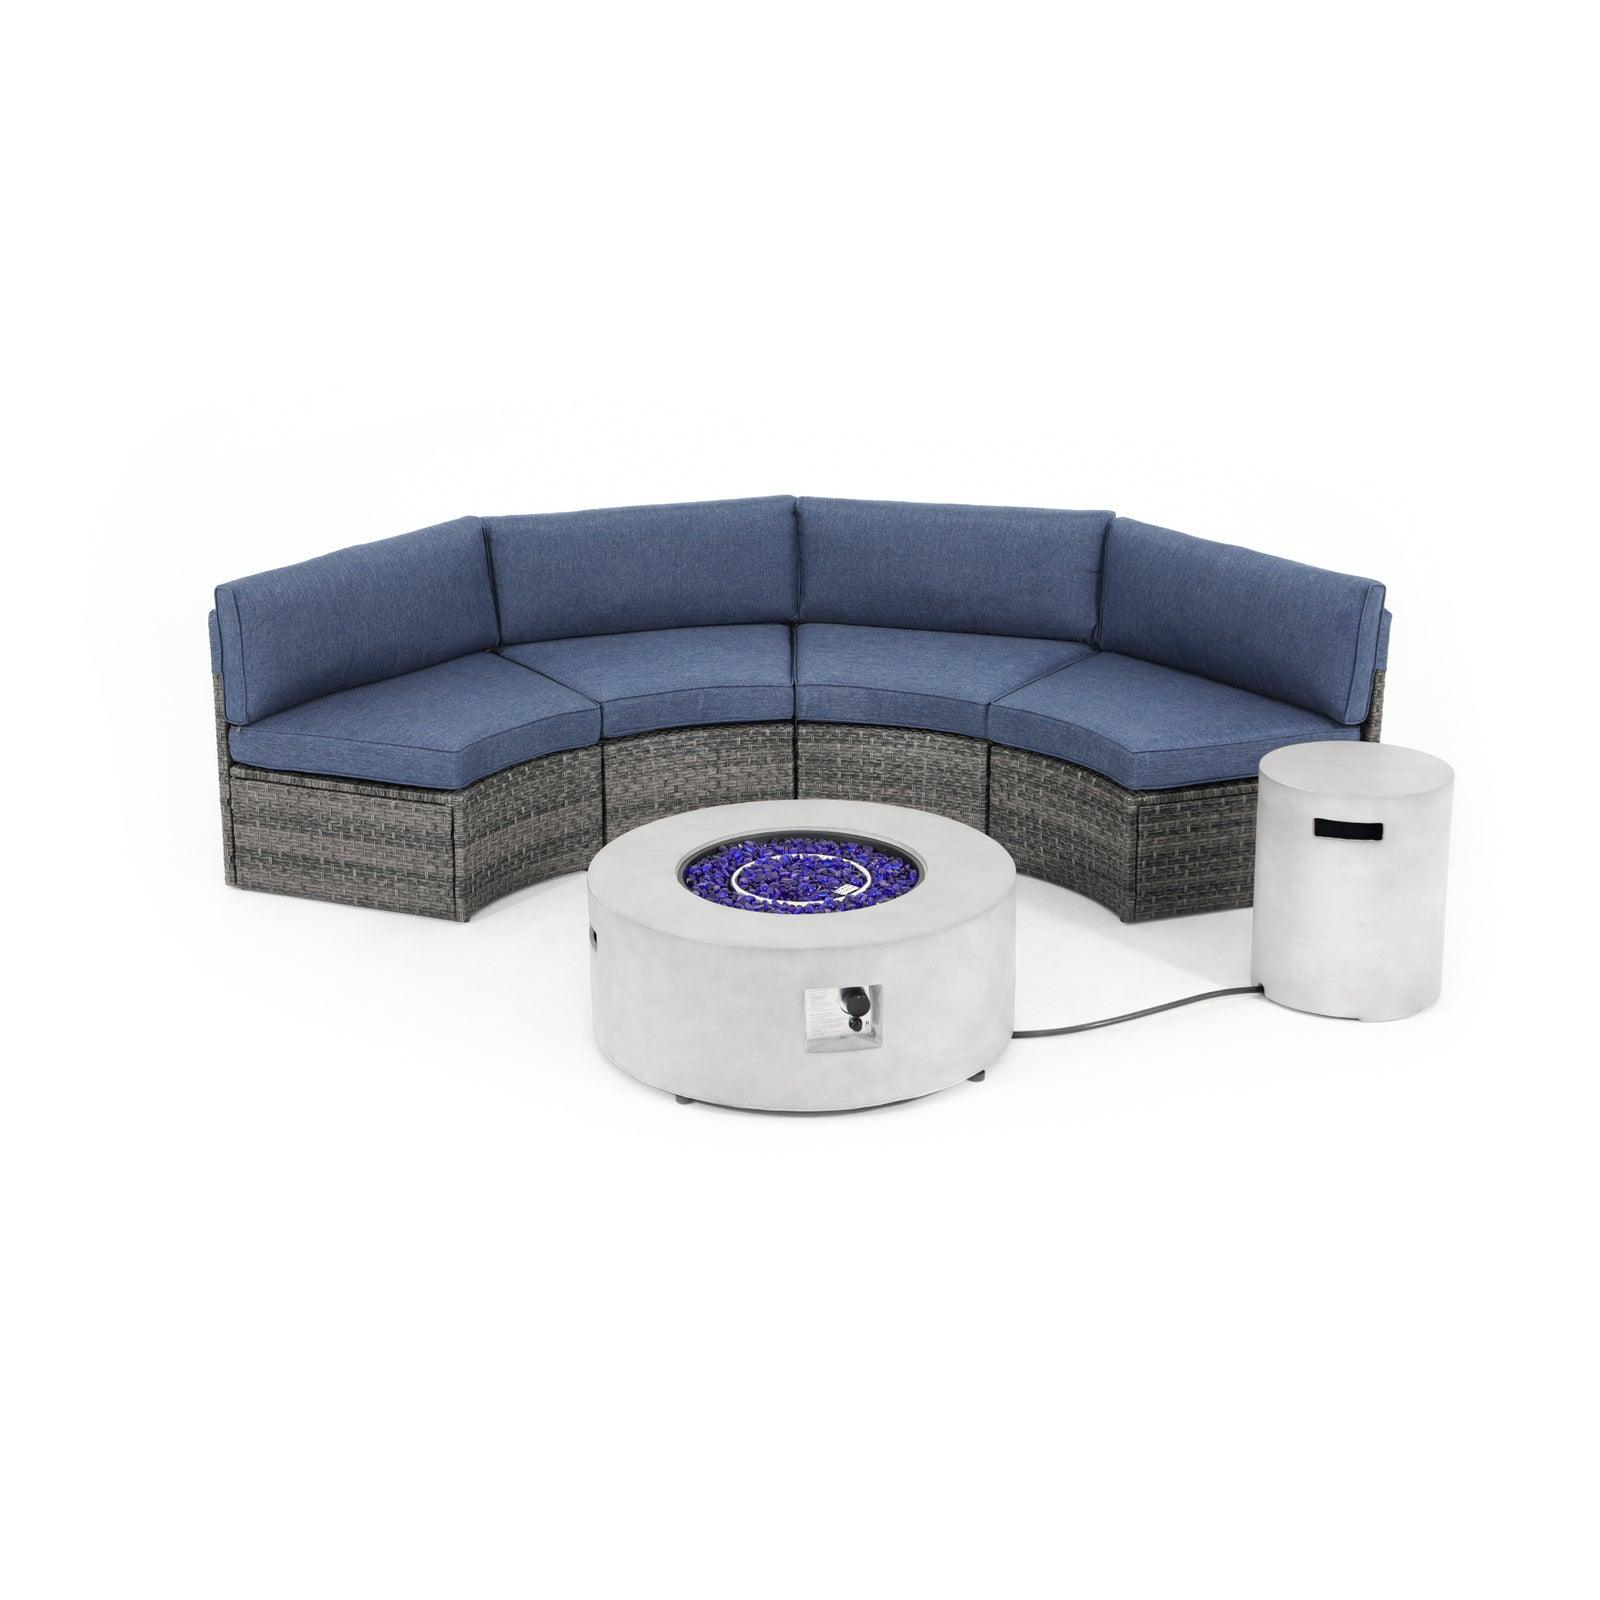 Boboli 4-seater Grey Wicker Curved Sectional sofas with navy blue cushions + 1 grey Propane Fire Pit with tank holder, front view- Jardina Furniture#color_Navy Blue #piece_5-pc.